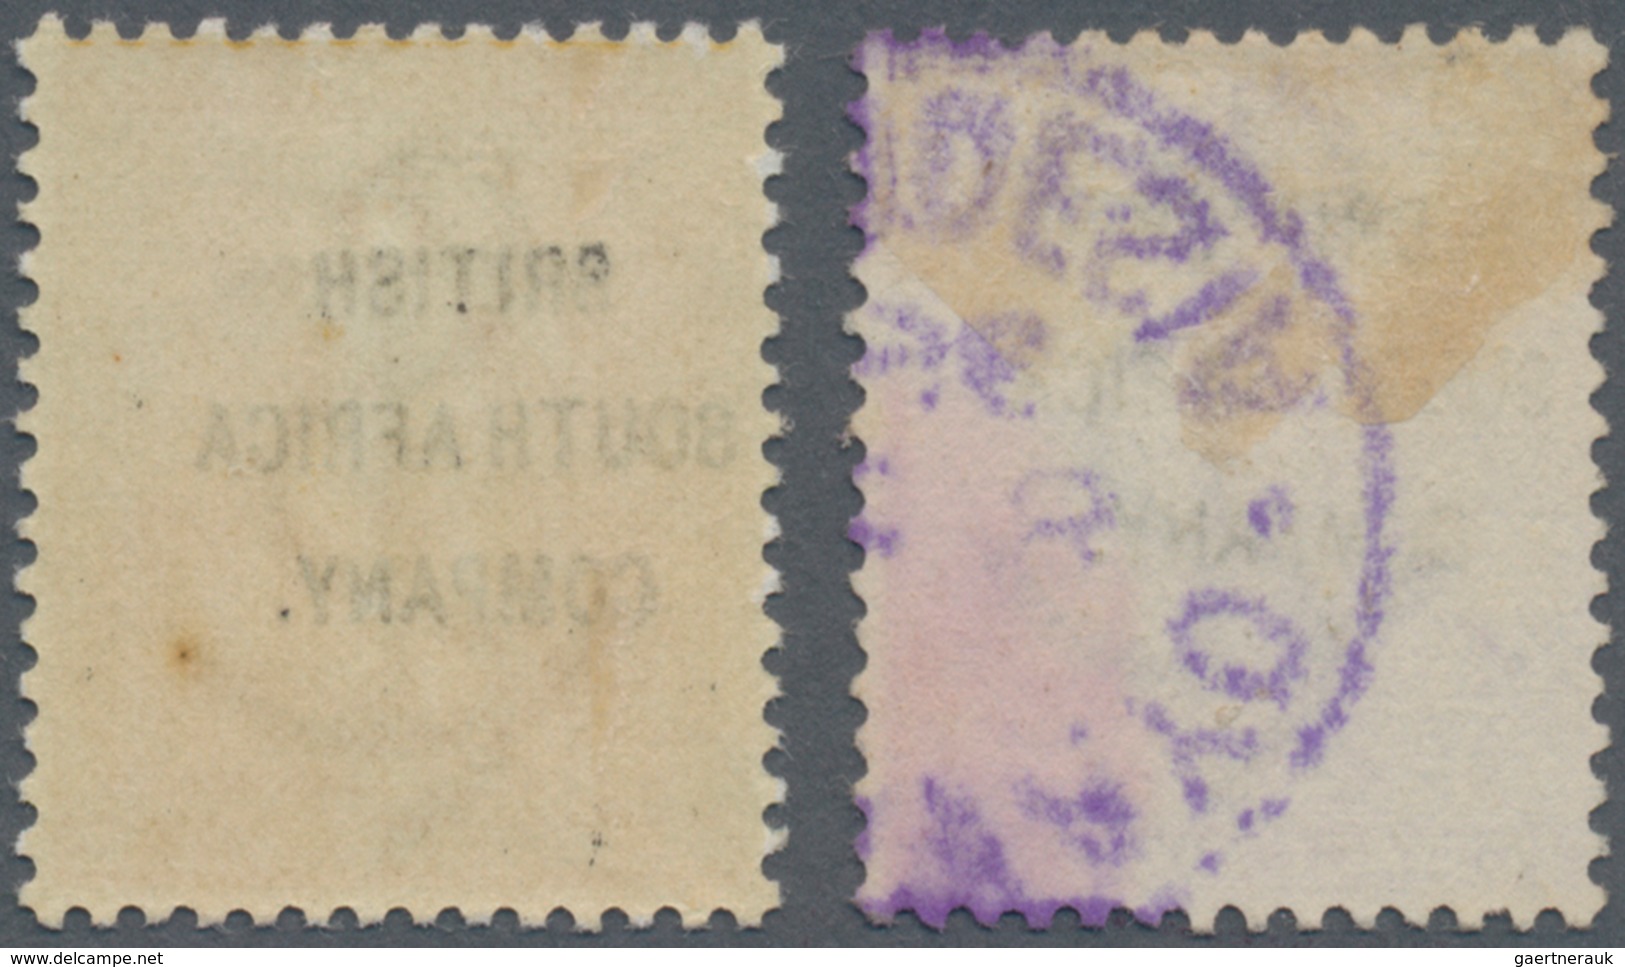 Britische Südafrika-Gesellschaft: 1896, Stamps Of CoGH With Opt. 'BRITISH SOUTH AFRICA COMPANY' 6d. - Unclassified